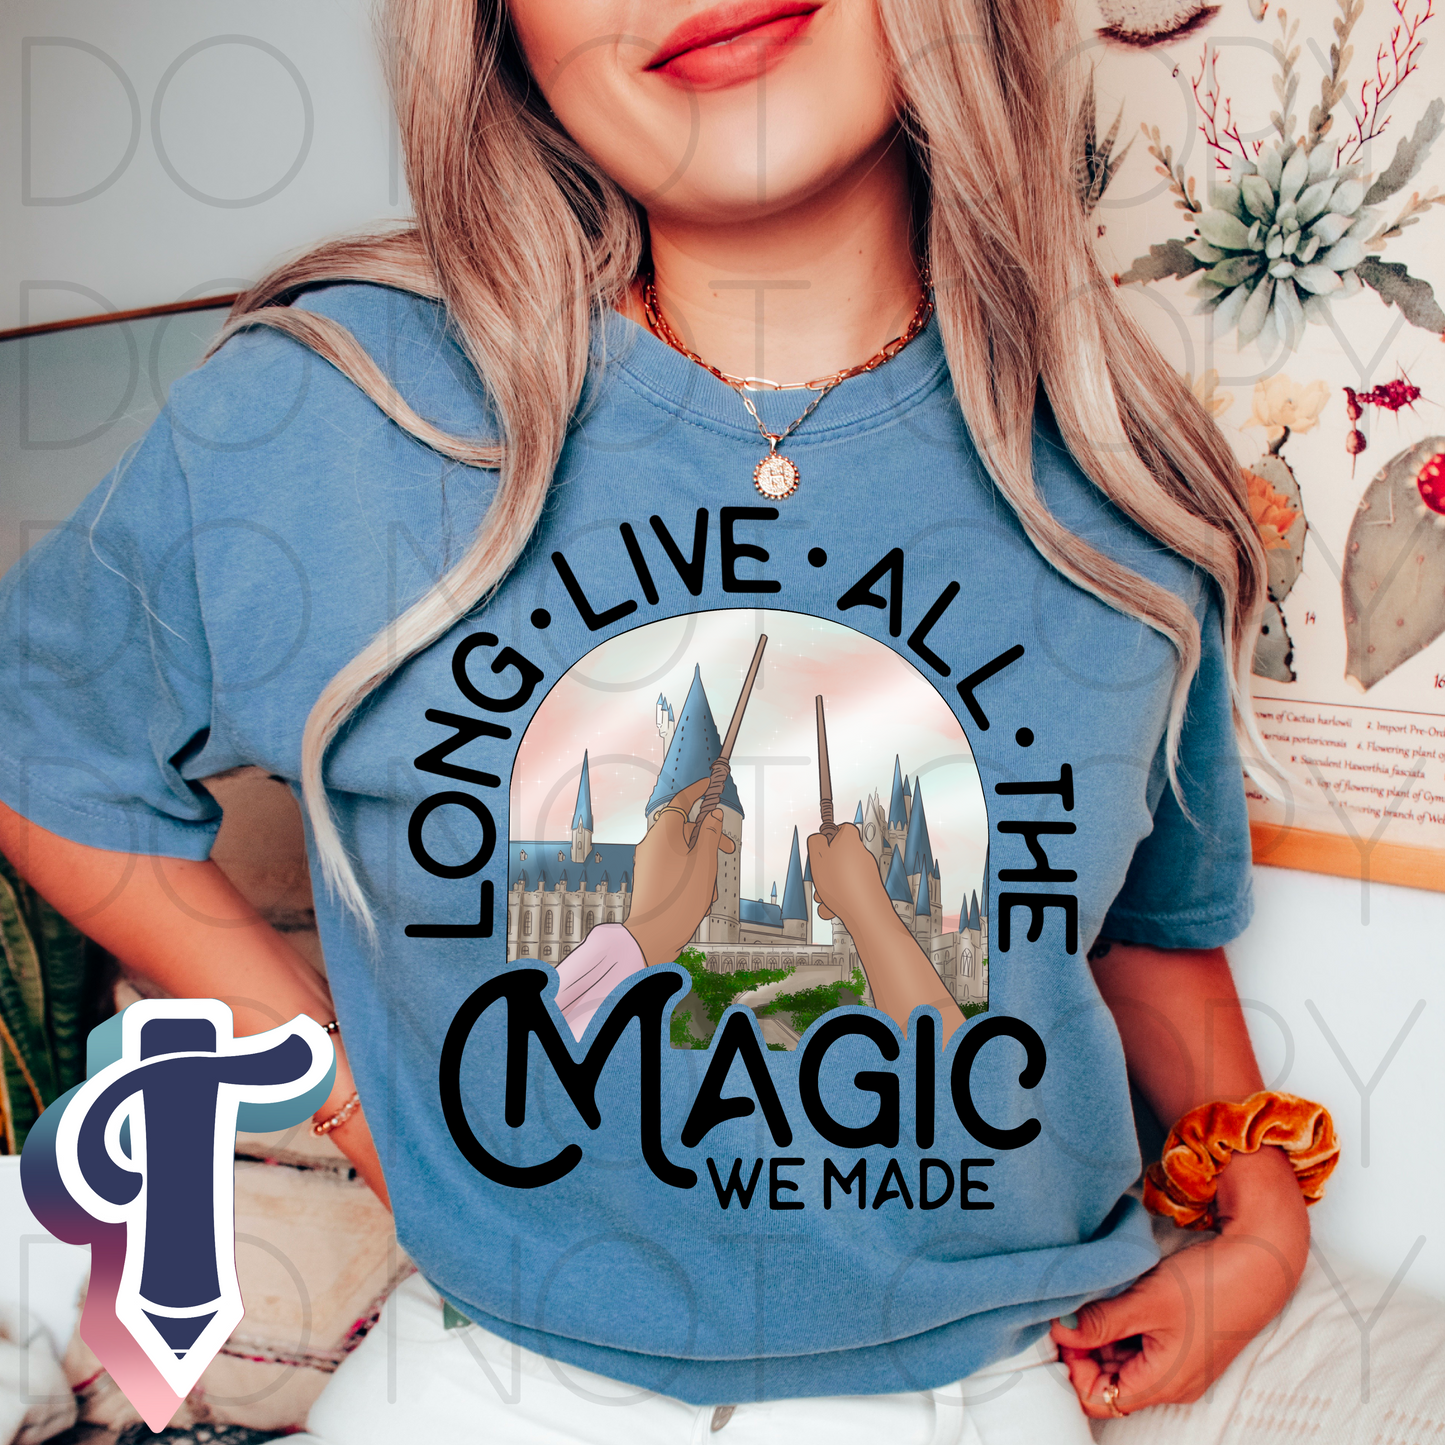 Long Live All The Magic We Made (Wizard) Digital Download